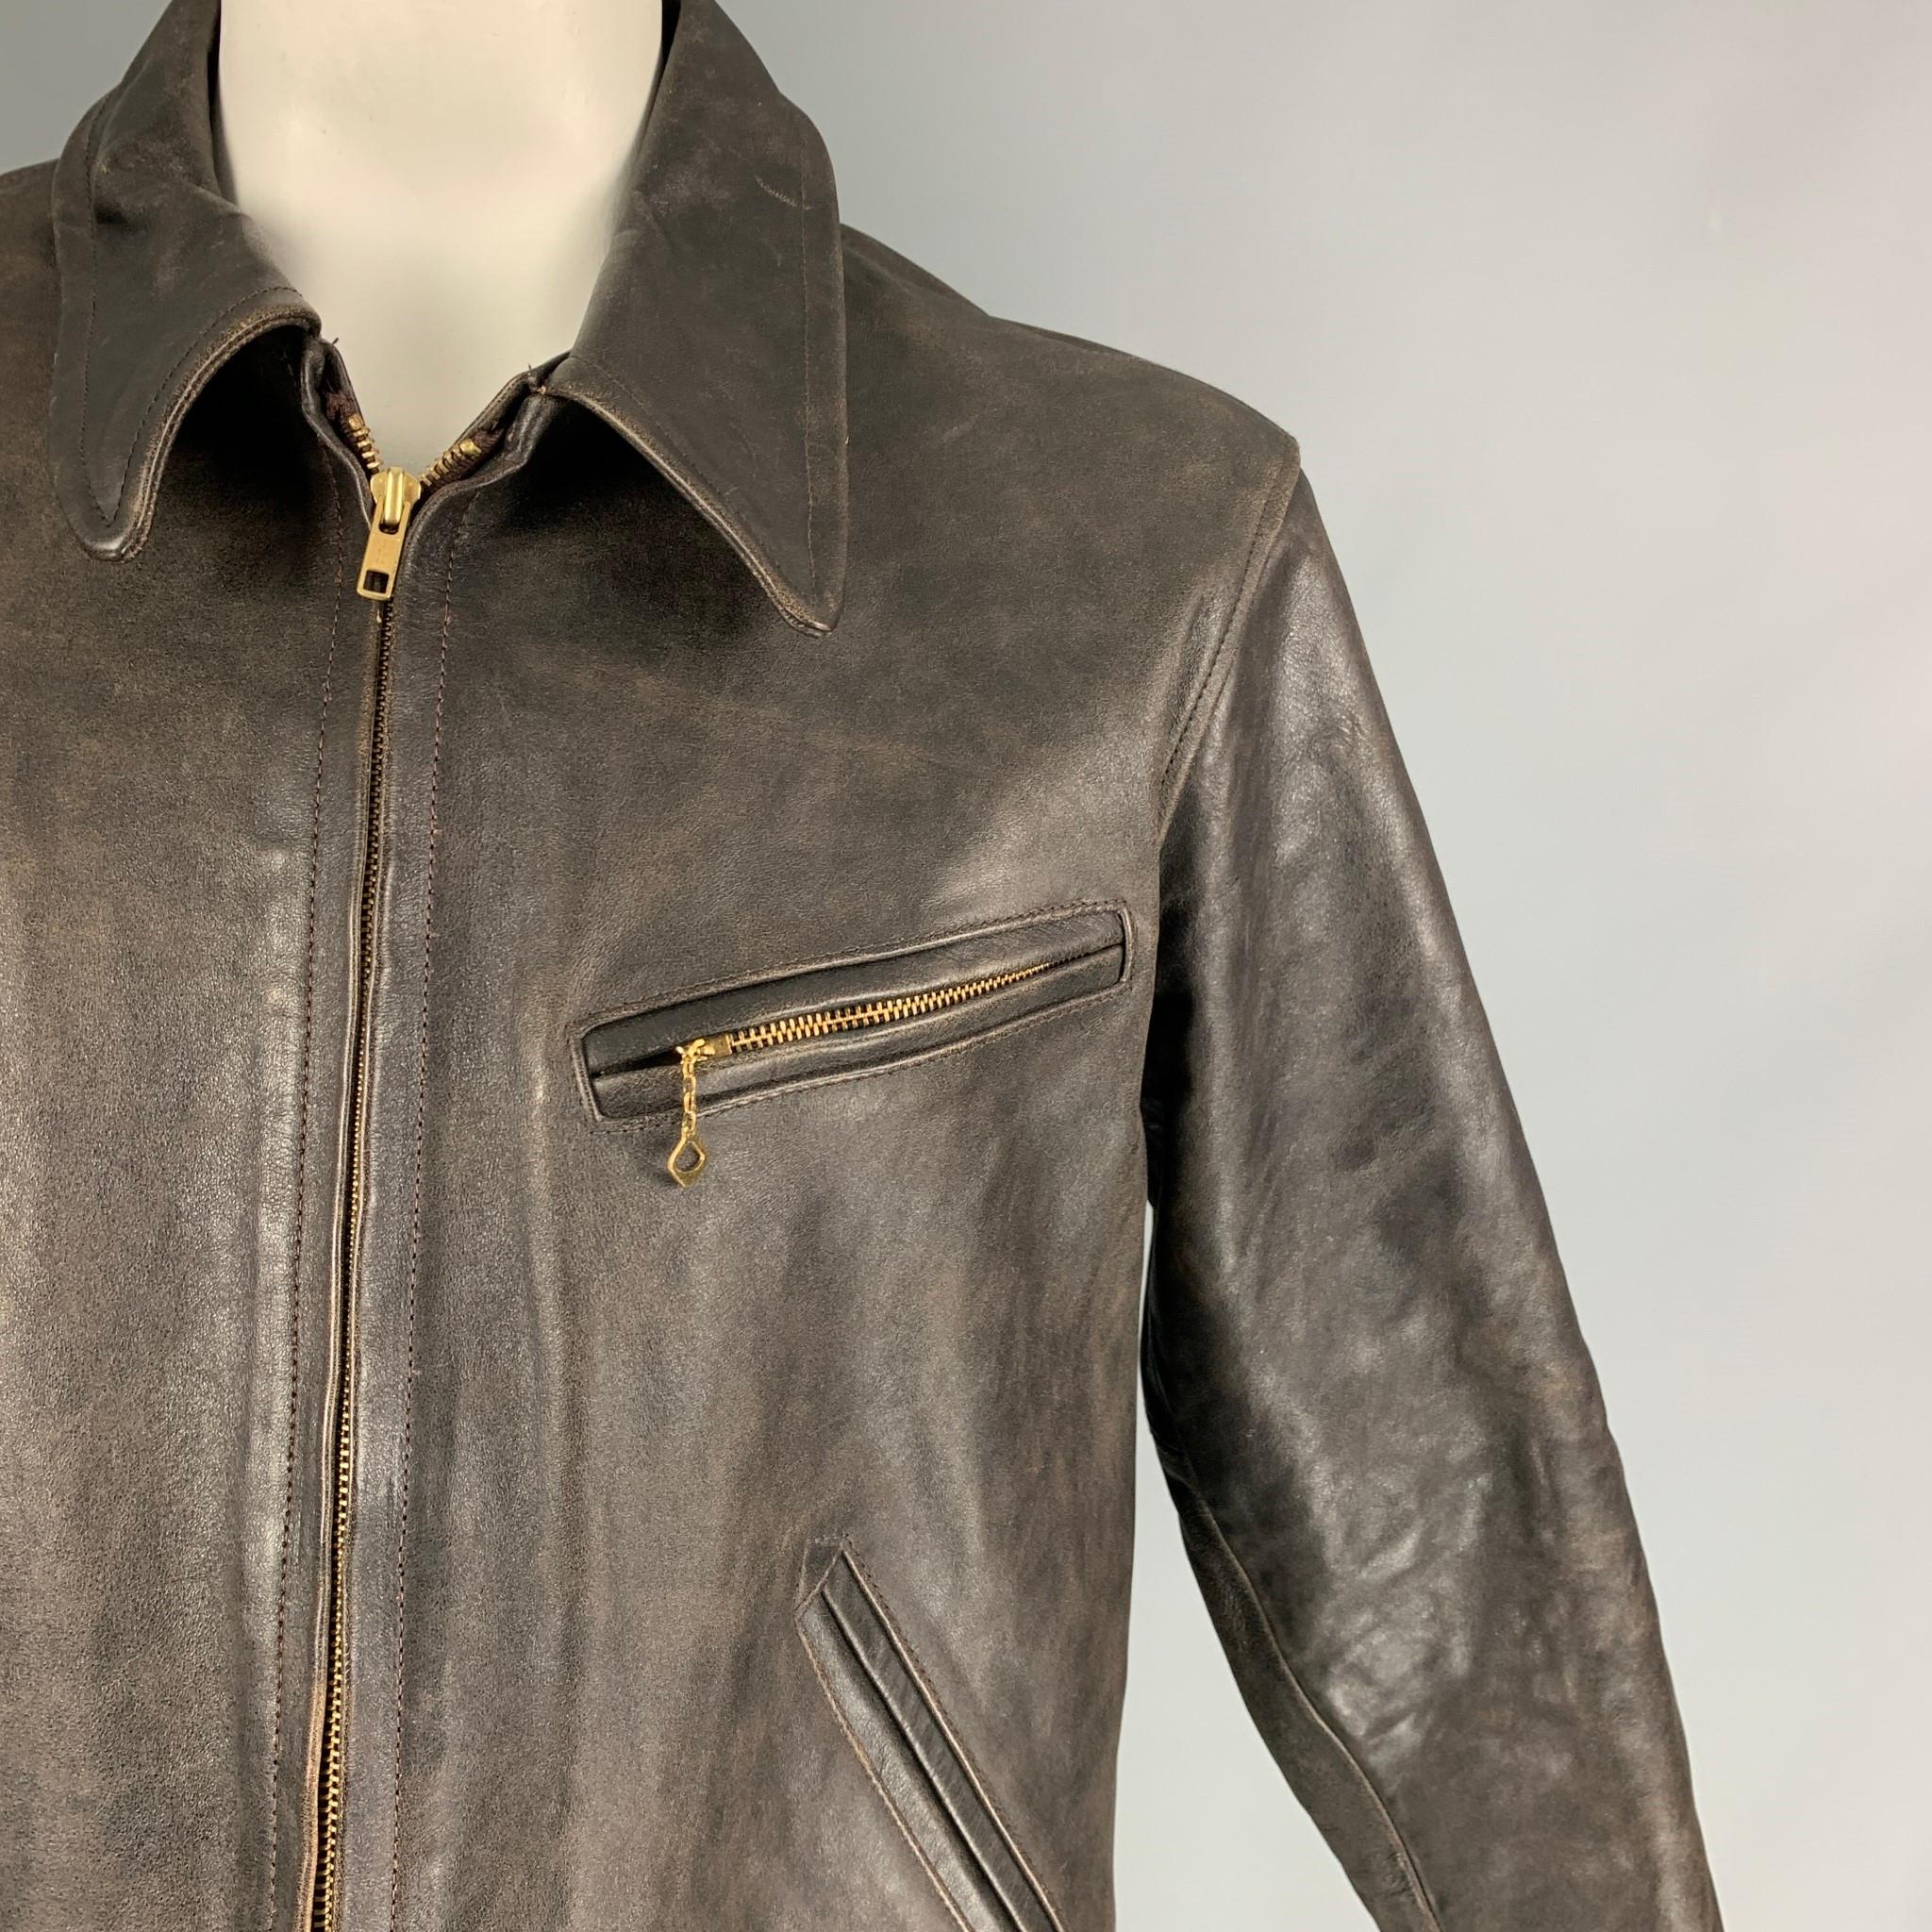 RRL by RALPH LAUREN jacket comes in a dark brown distressed leather with a plaid liner featuring a spread collar, front zipper pockets, and a full zip up closure. 

Very Good Pre-Owned Condition.
Marked: XL

Measurements:

Shoulder: 20 in.
Chest: 46